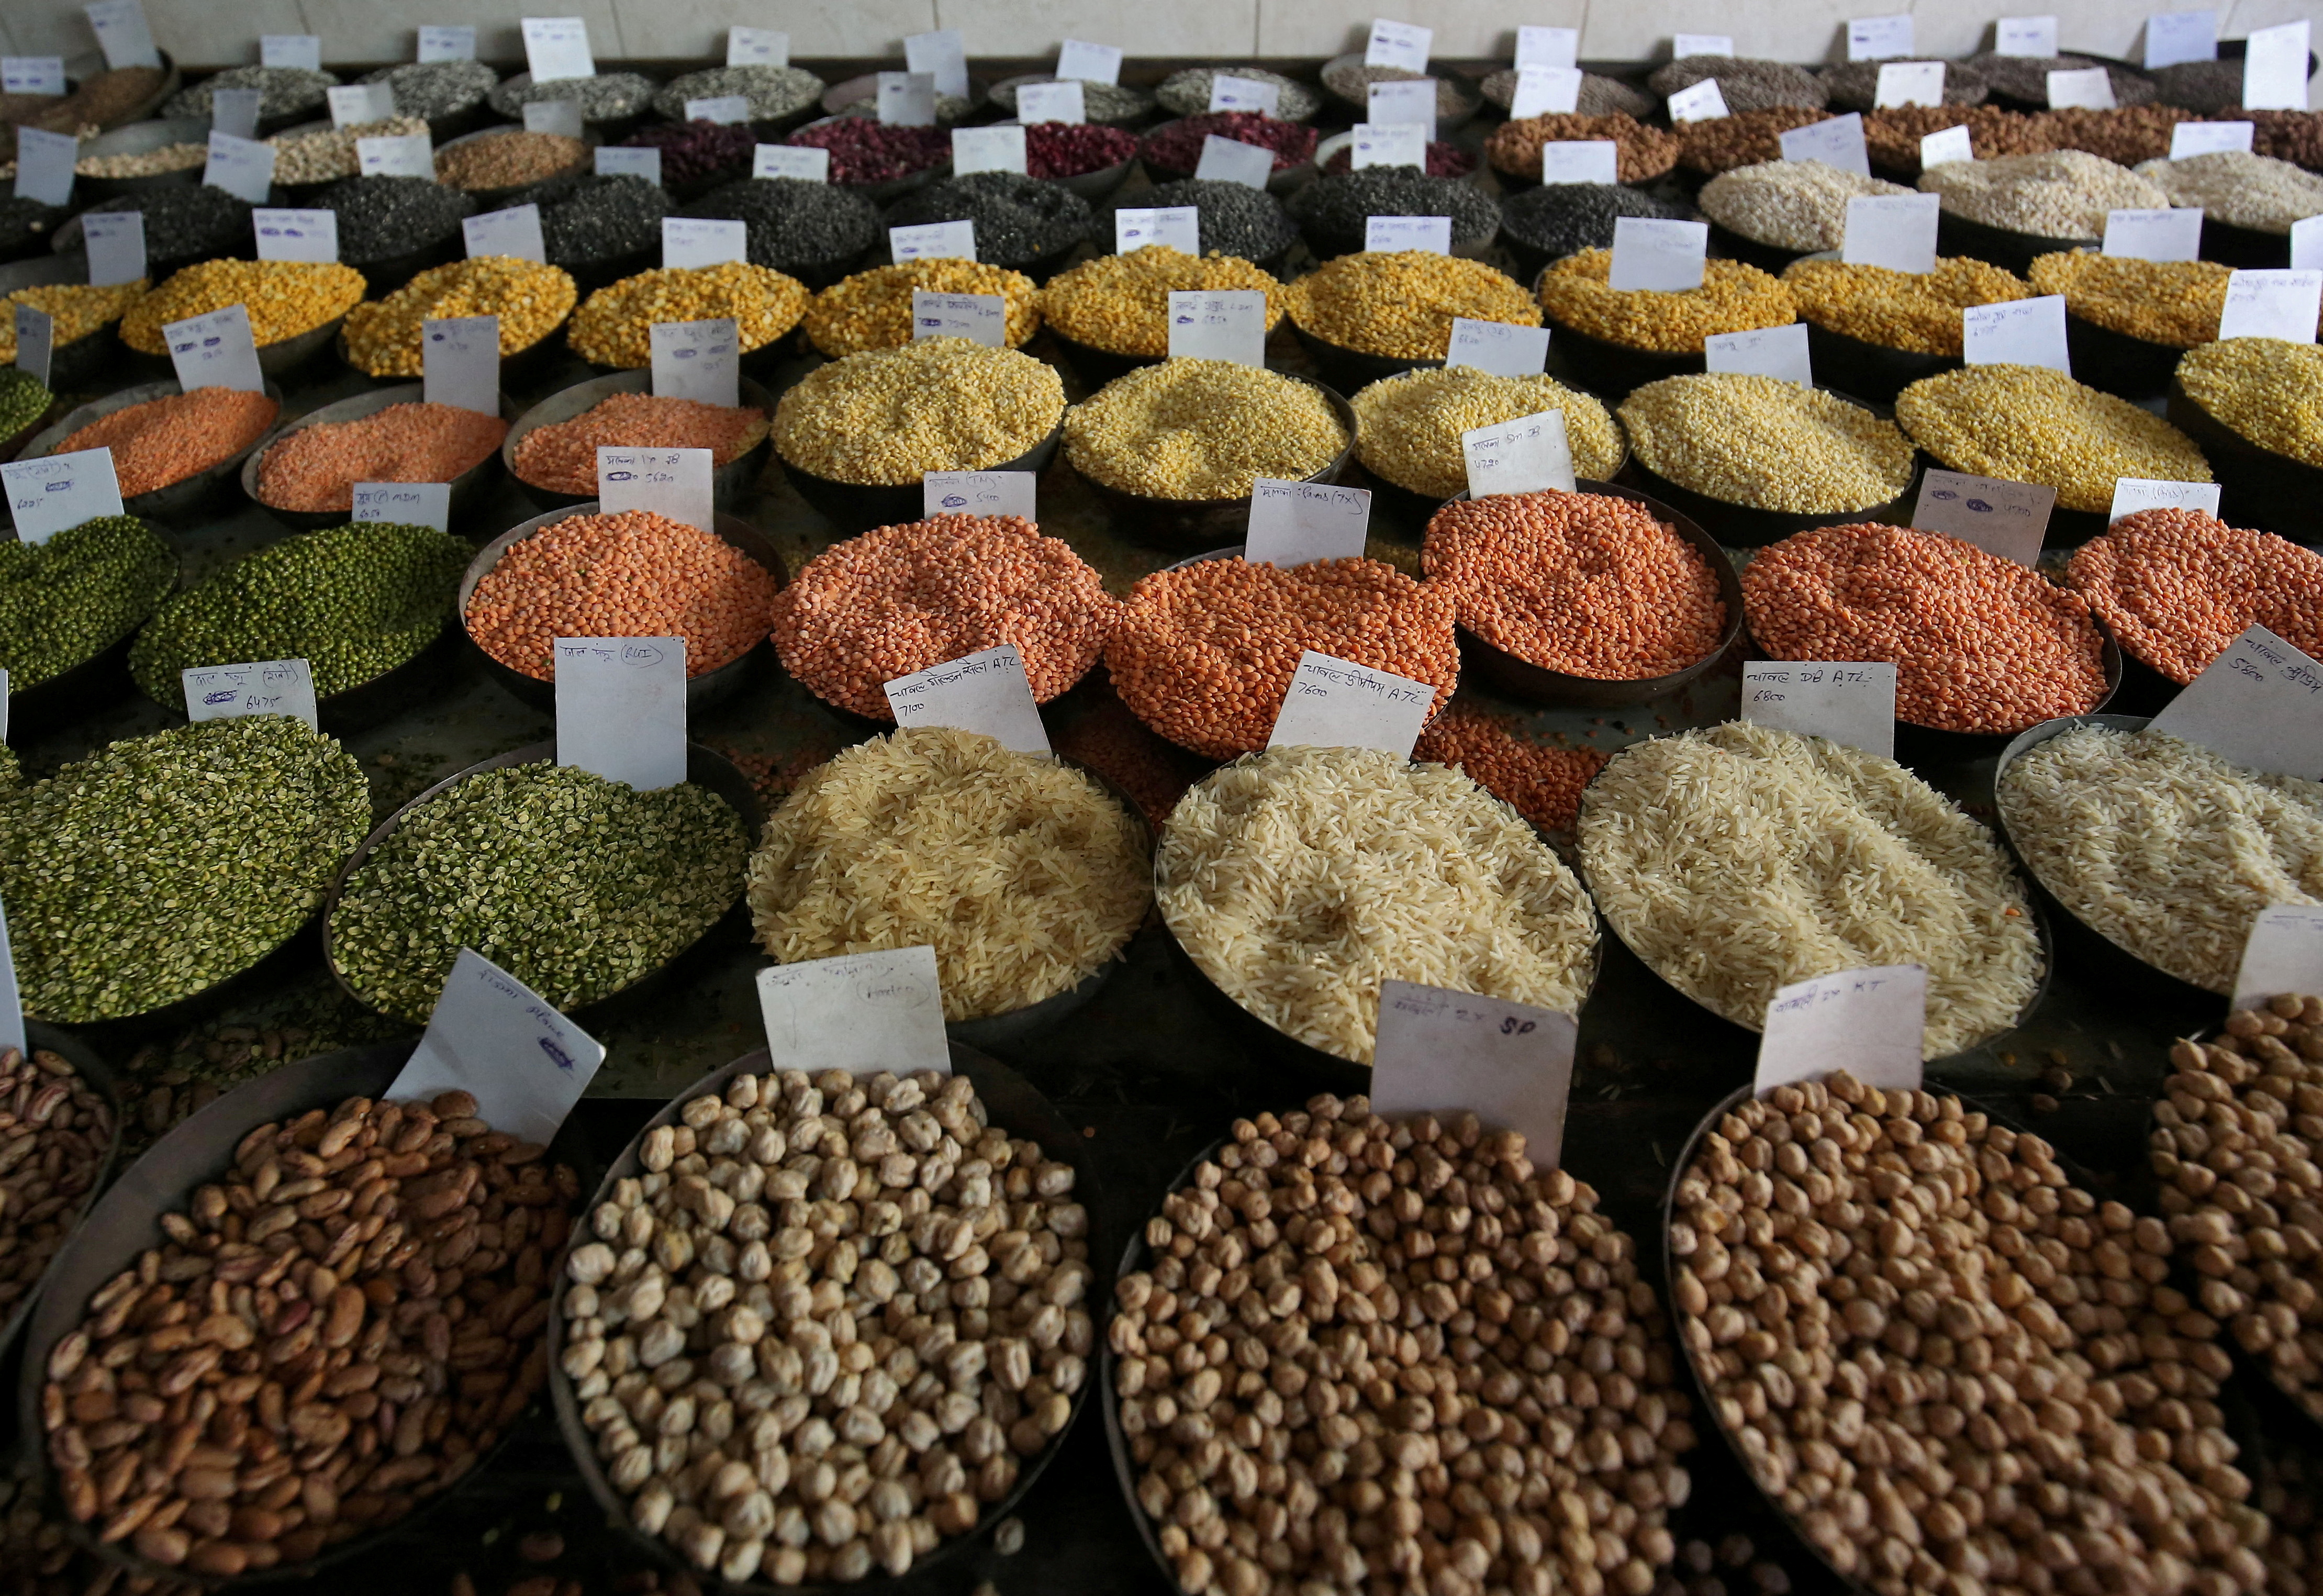 India says no plans for now to curb food exports | Reuters